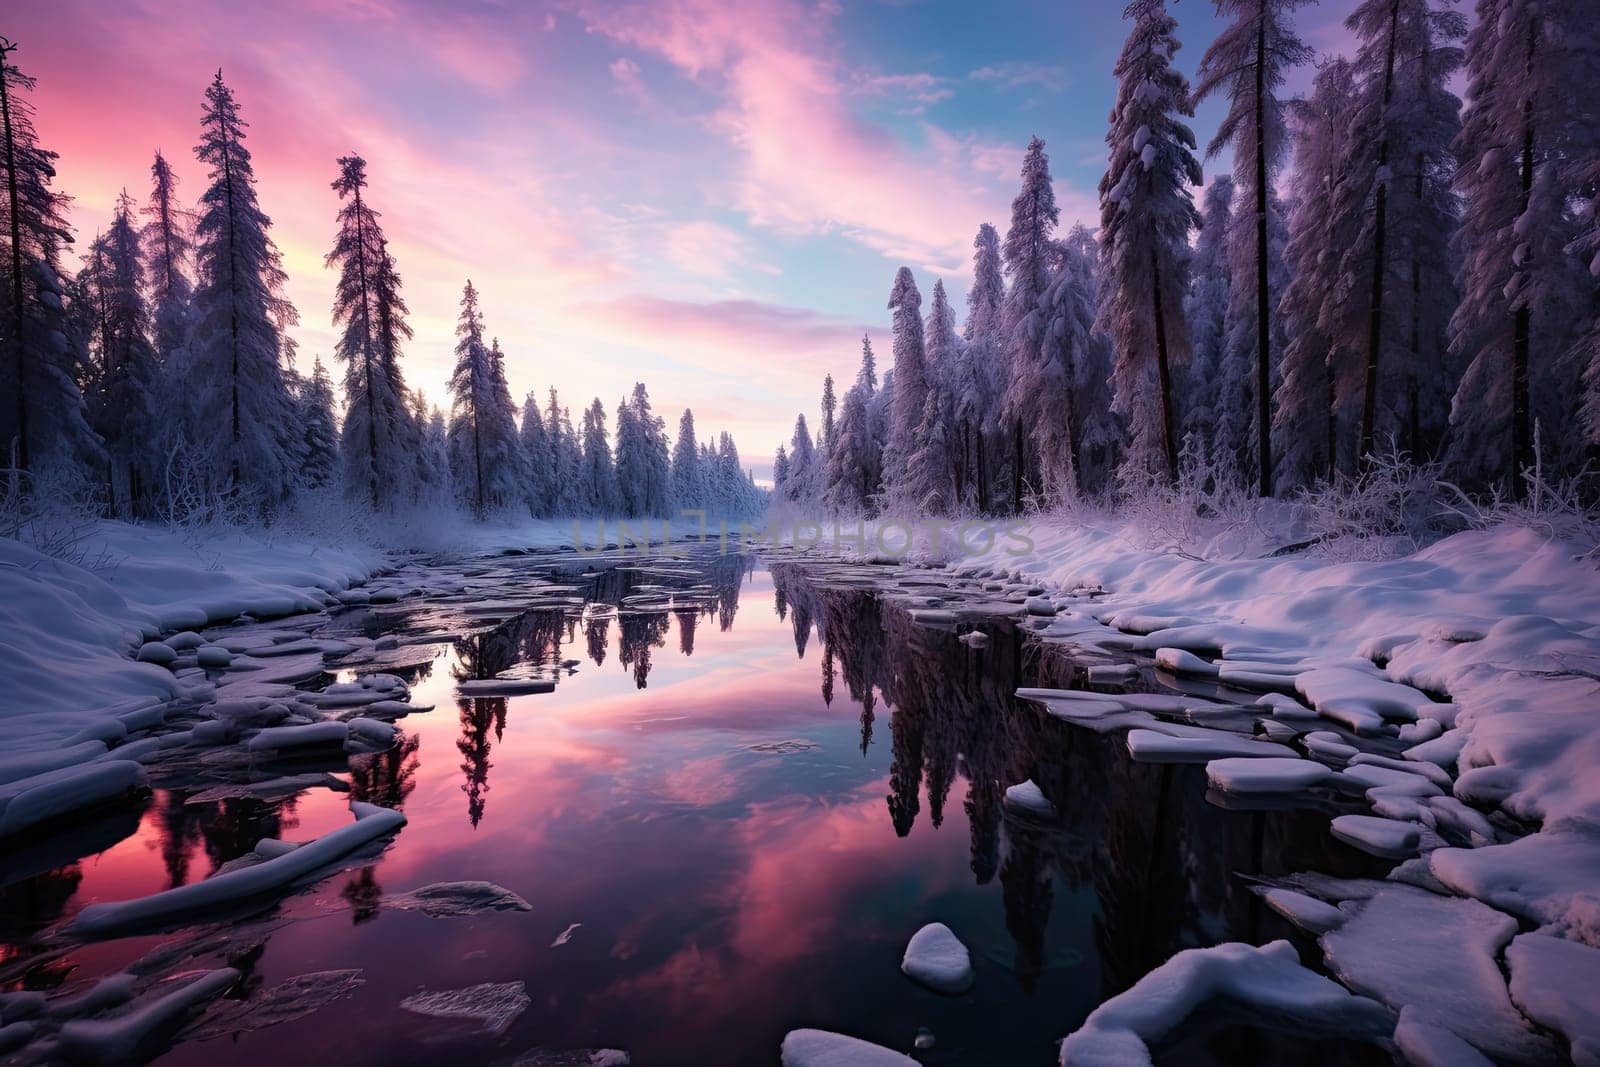 A Winter Wonderland: Majestic Trees, Glistening Snow, and Tranquil Waters